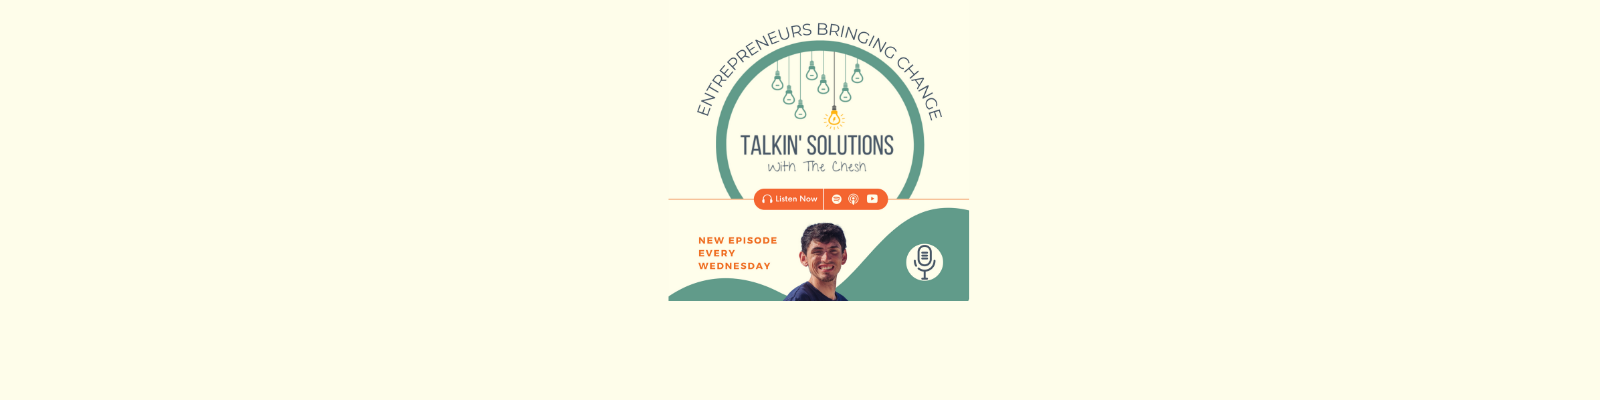 Talkin’ Solutions: Solving Problems With Global Thought Leaders